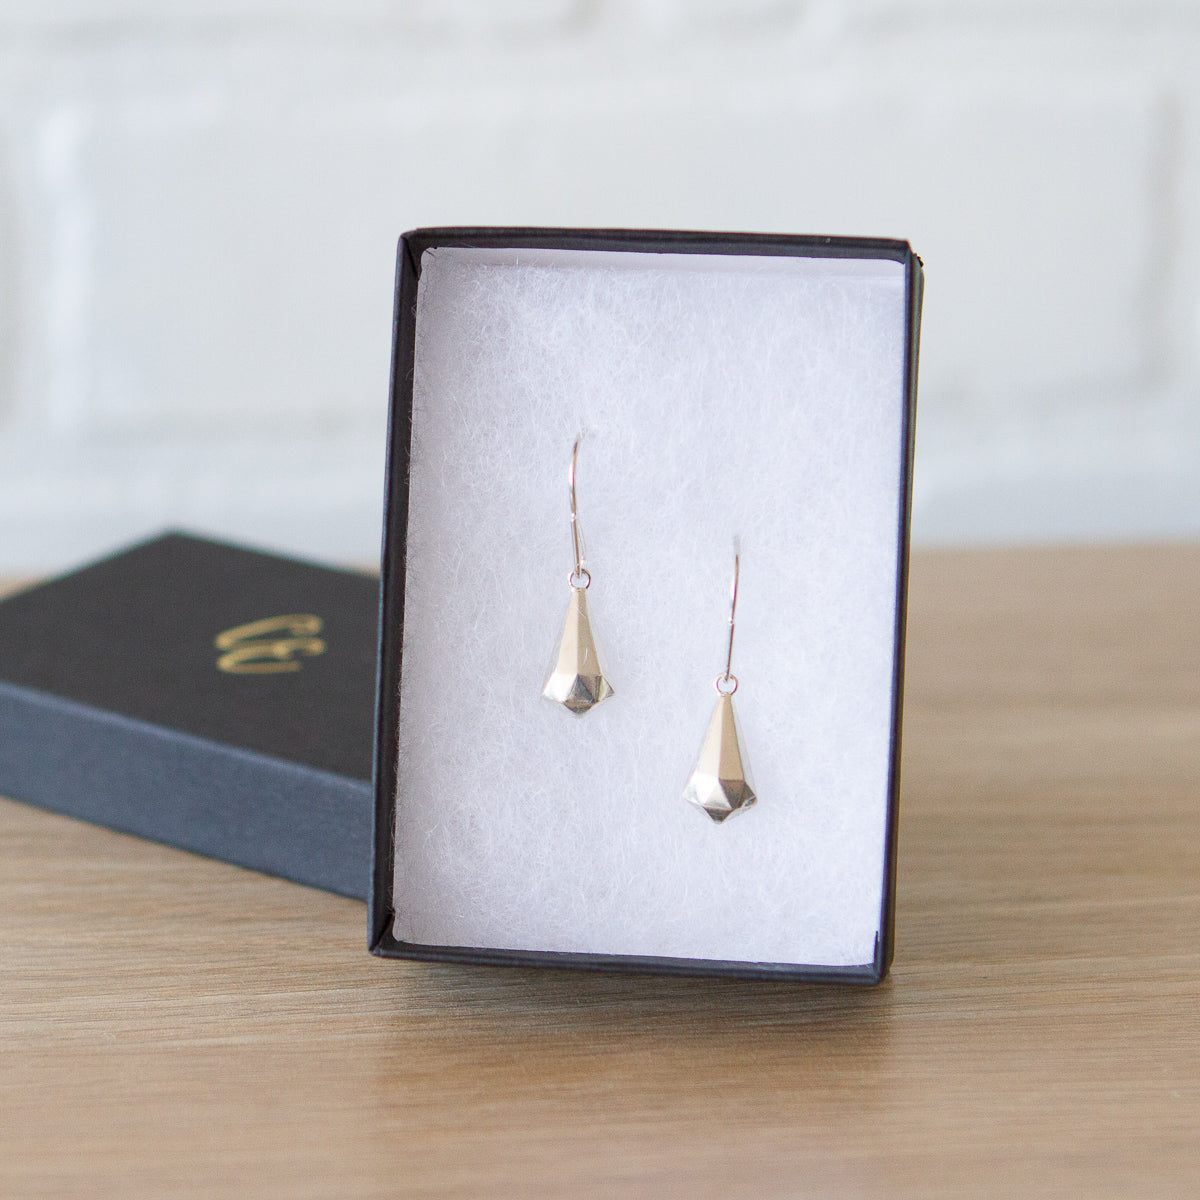 Silver Faceted Drop Dangle Earrings in a gift box